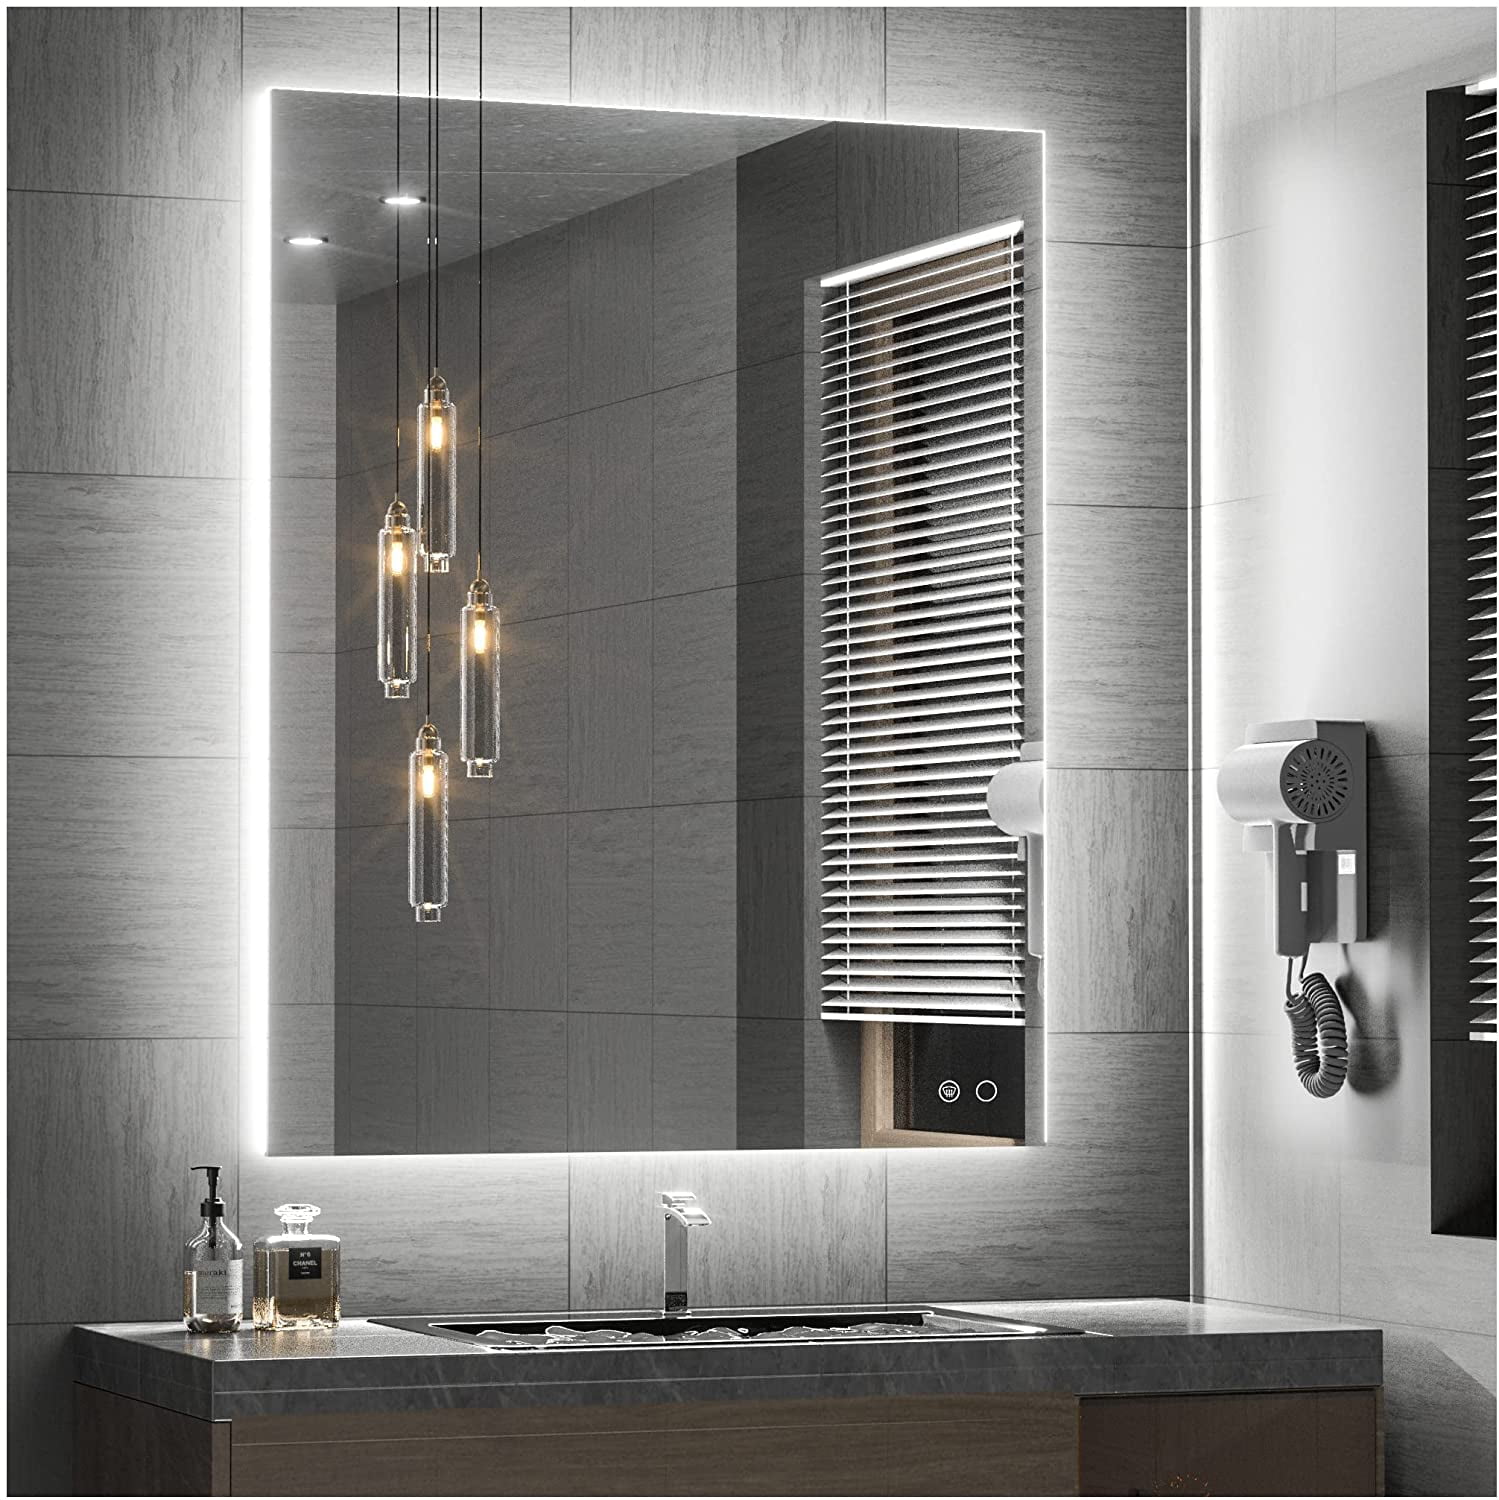 Details about   LED Bath Wall-Mounted Makeup Vanity Mirror w/ Touch Button Waterproof & Anti Fog 